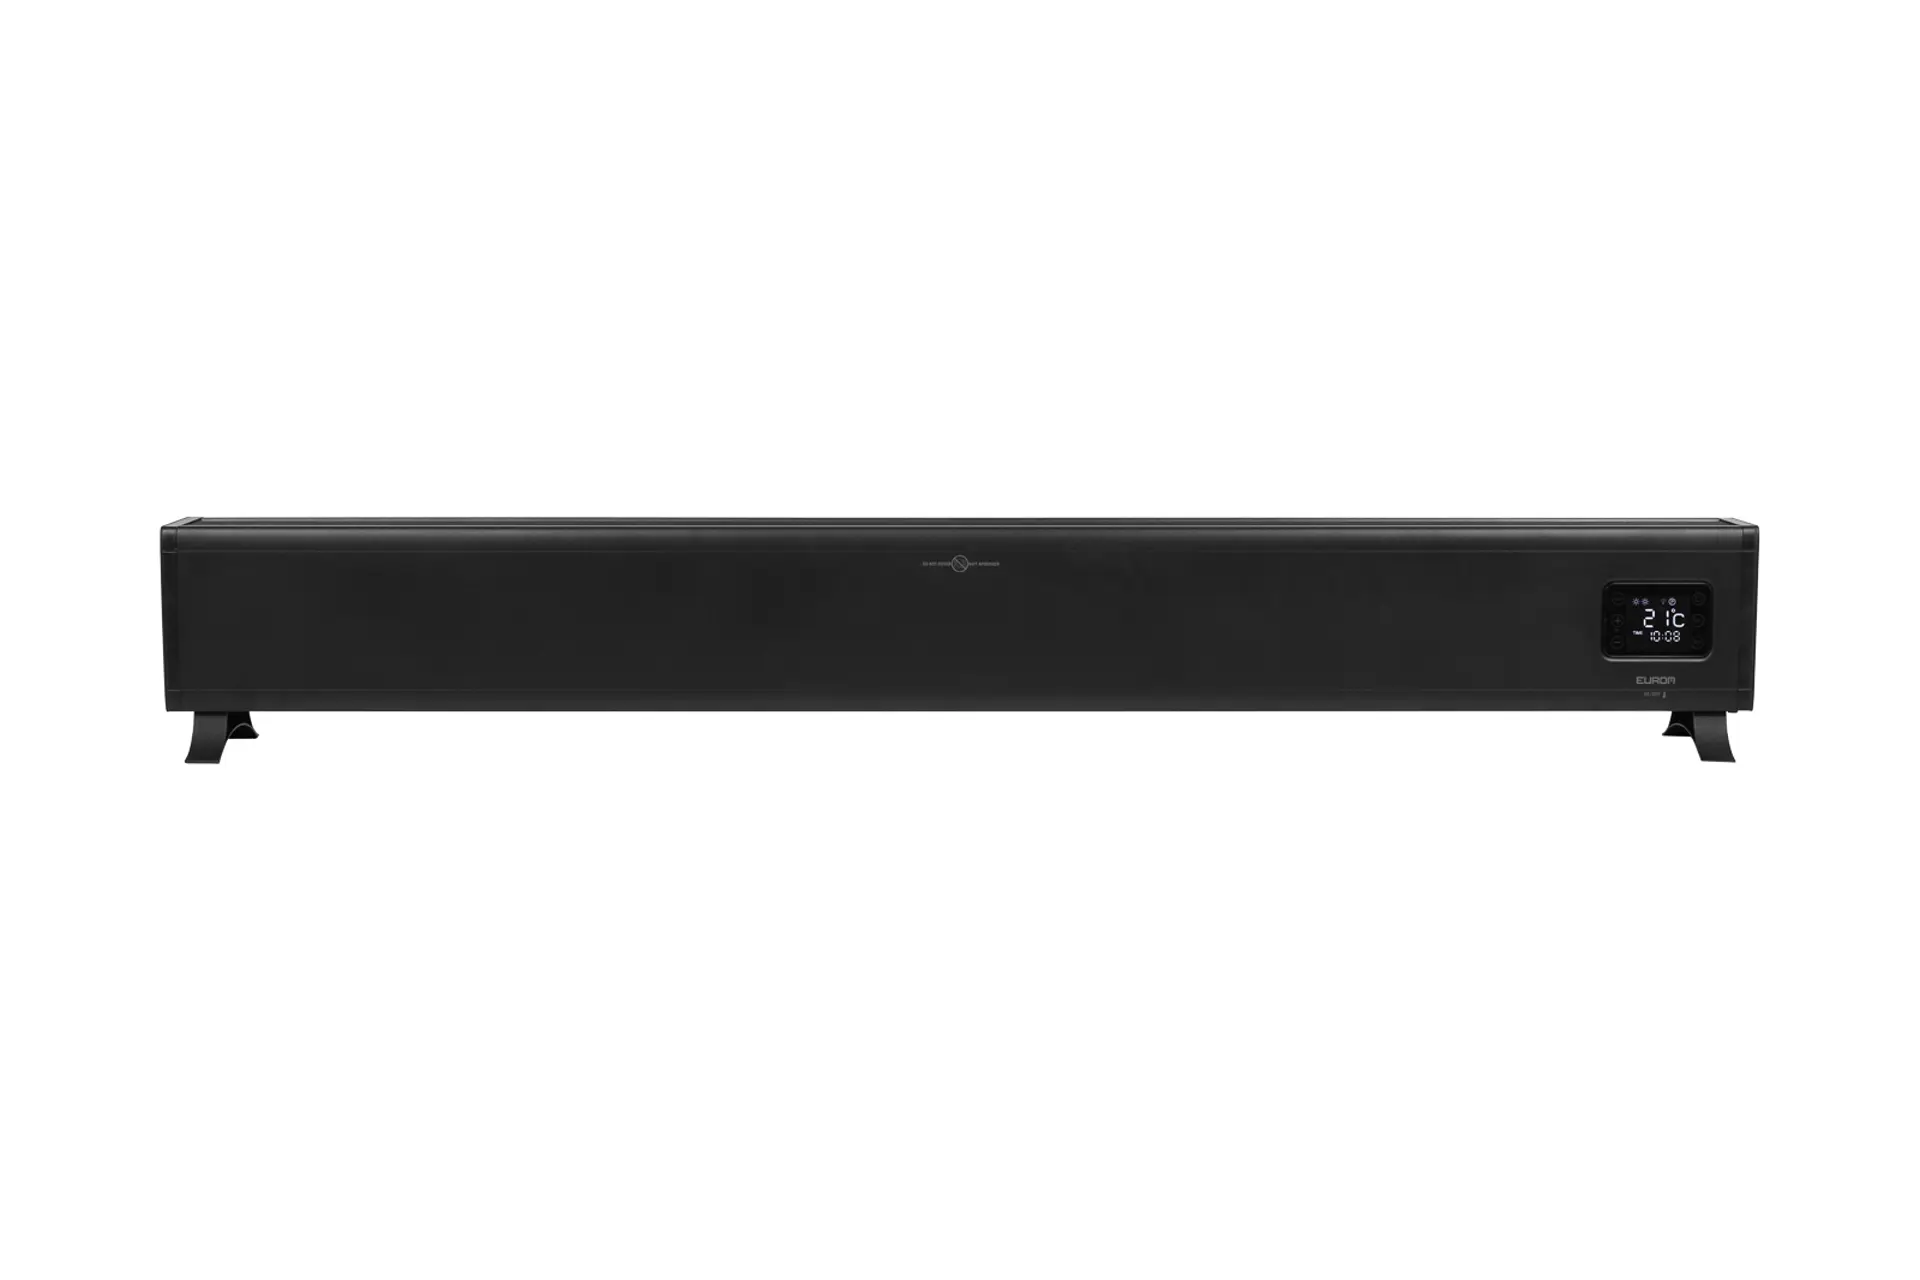 alutherm-baseboard-2500-black-002.png